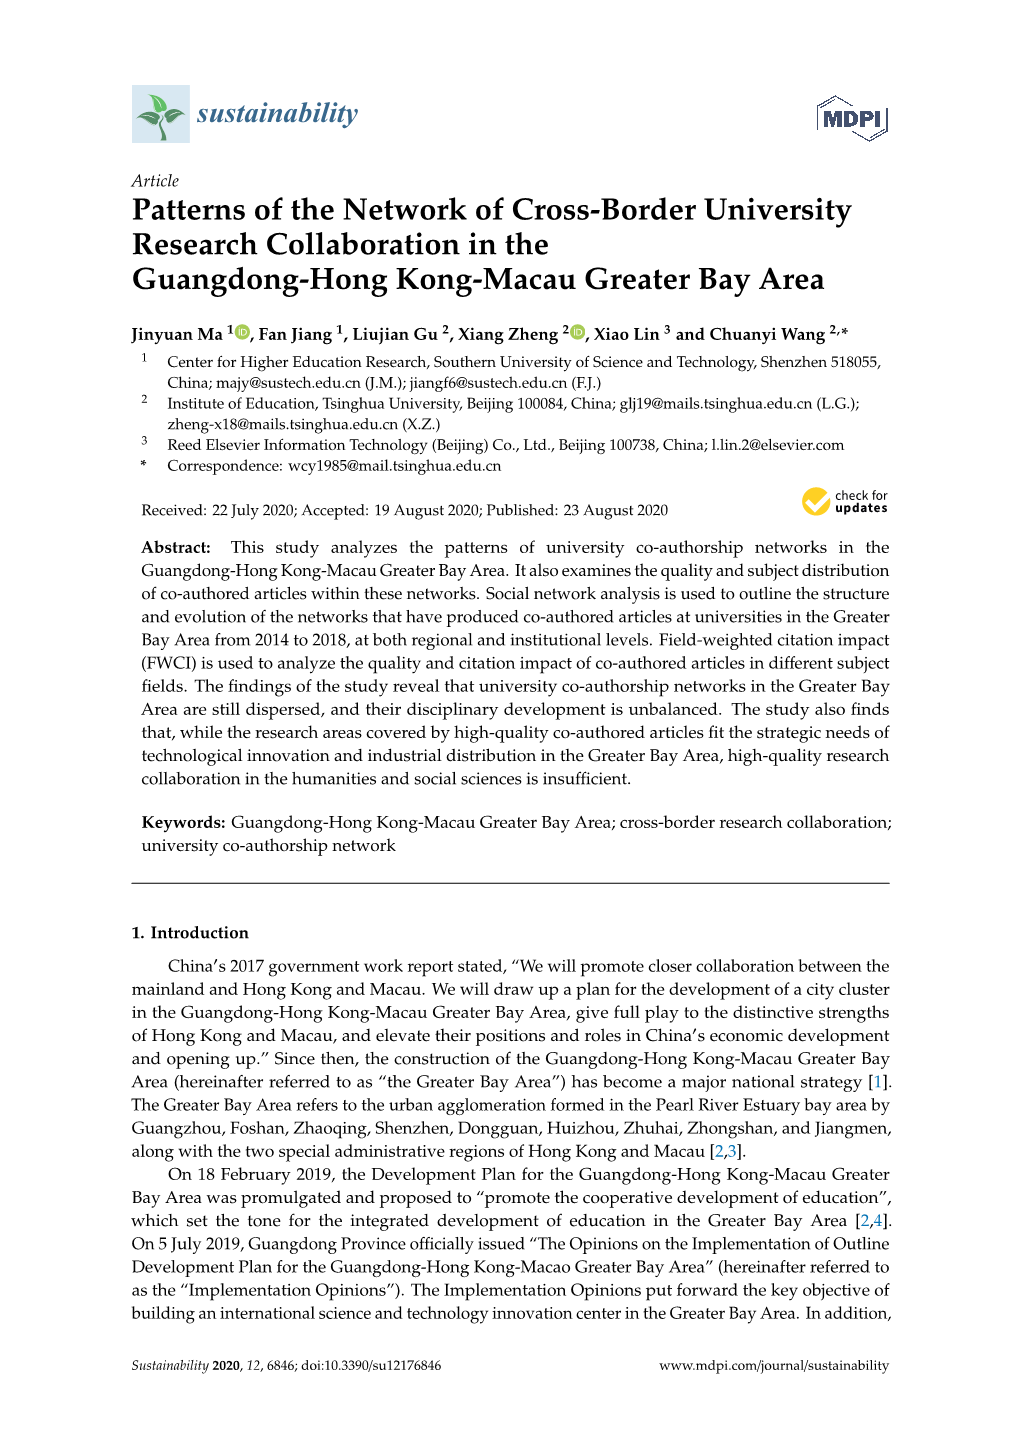 Patterns of the Network of Cross-Border University Research Collaboration in the Guangdong-Hong Kong-Macau Greater Bay Area